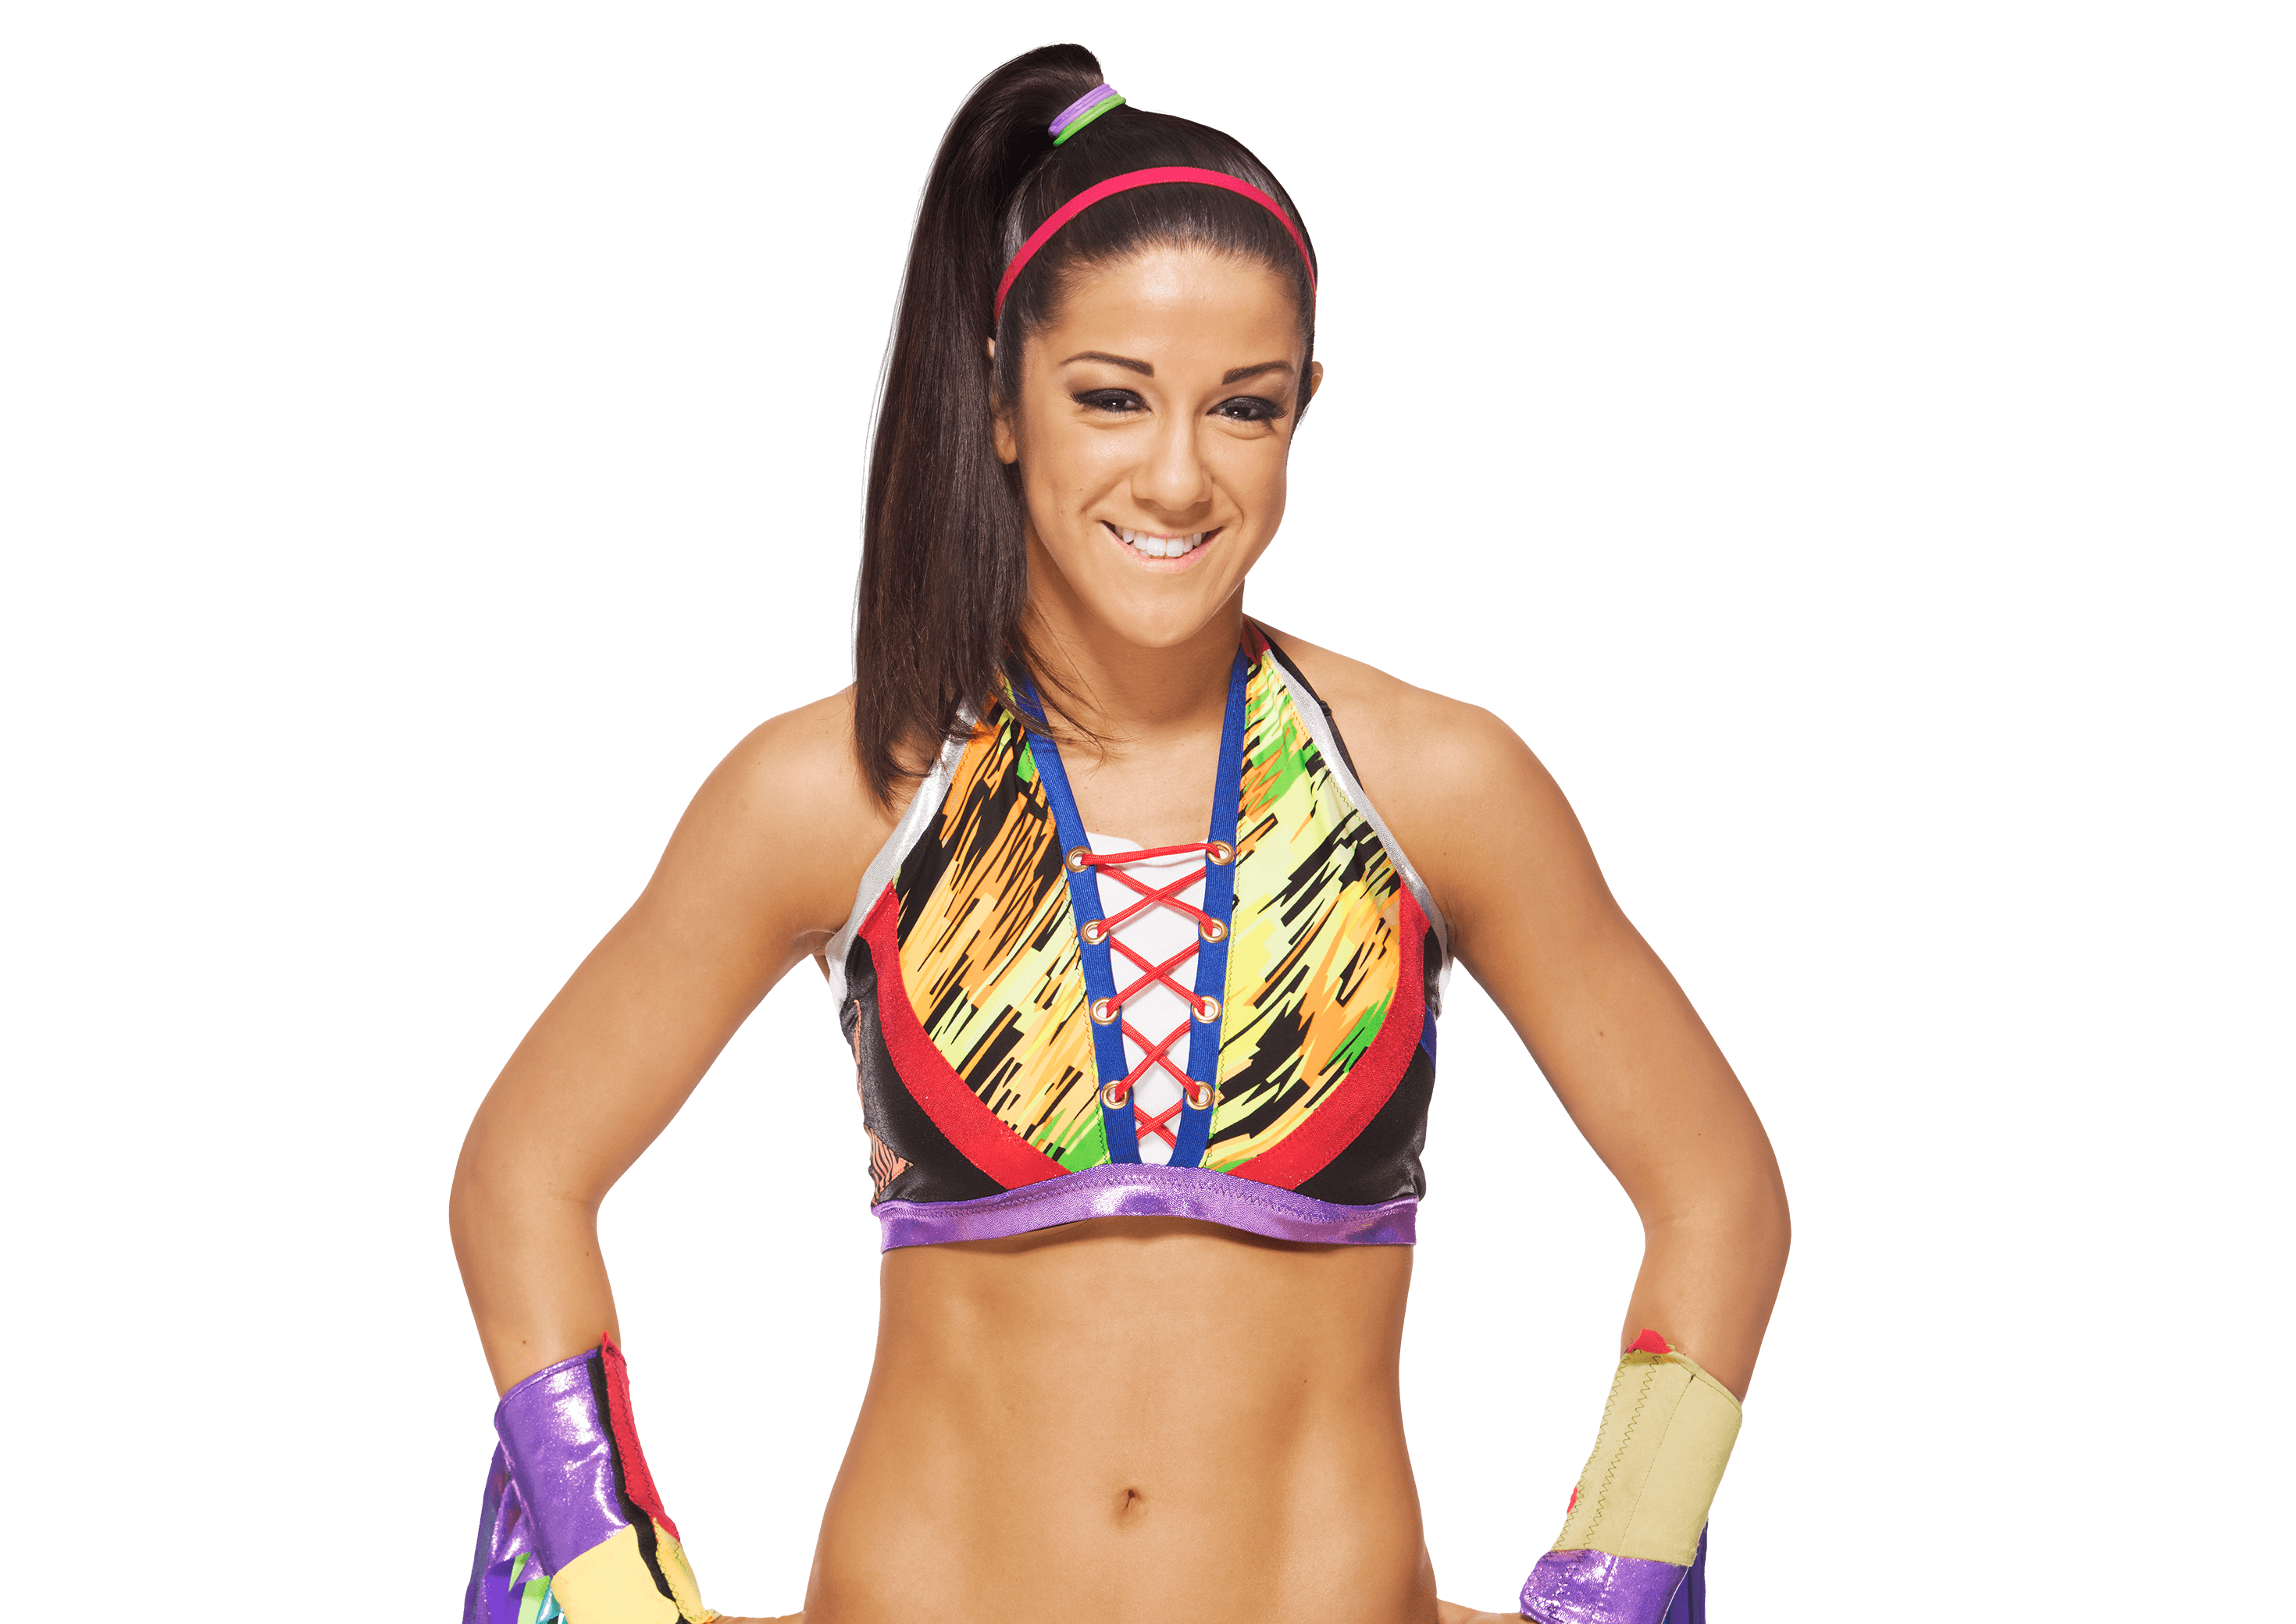 61 Sexy Bayley Boobs Pictures Will Rock The Wwe Fan Inside You